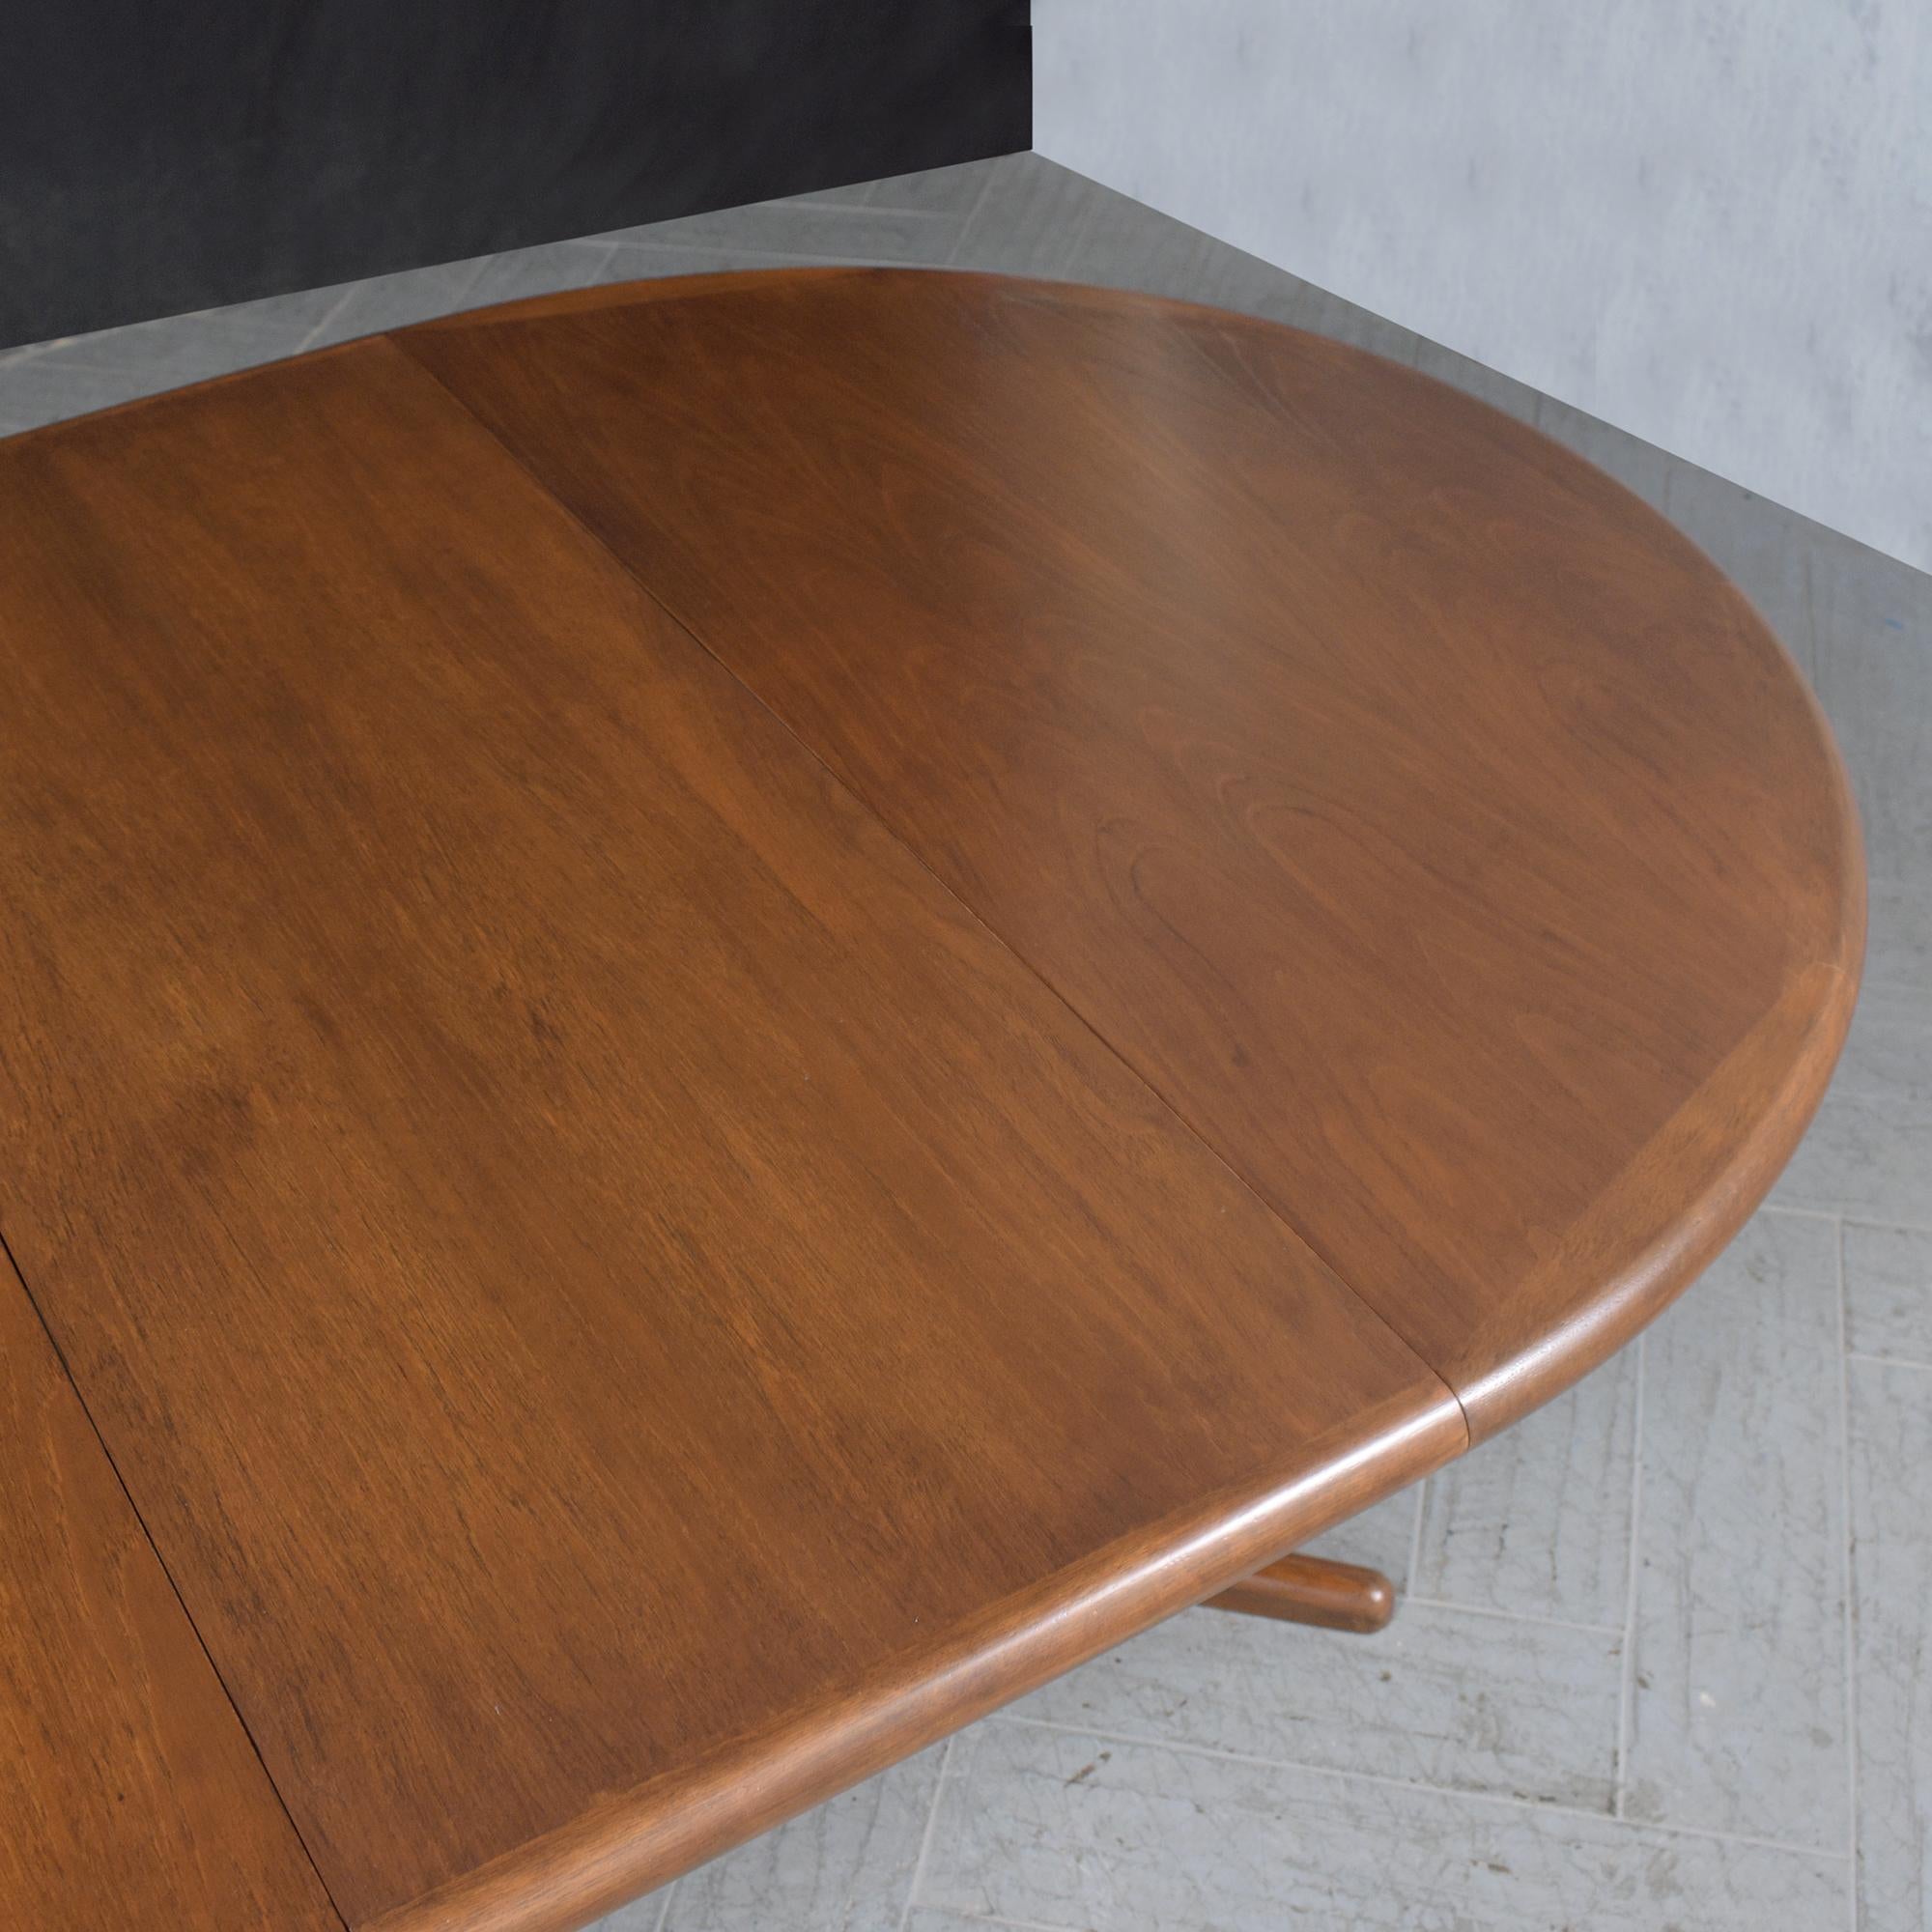 Lacquer Vintage Danish Extendable Dining Table: Mid-Century Modern Elegance